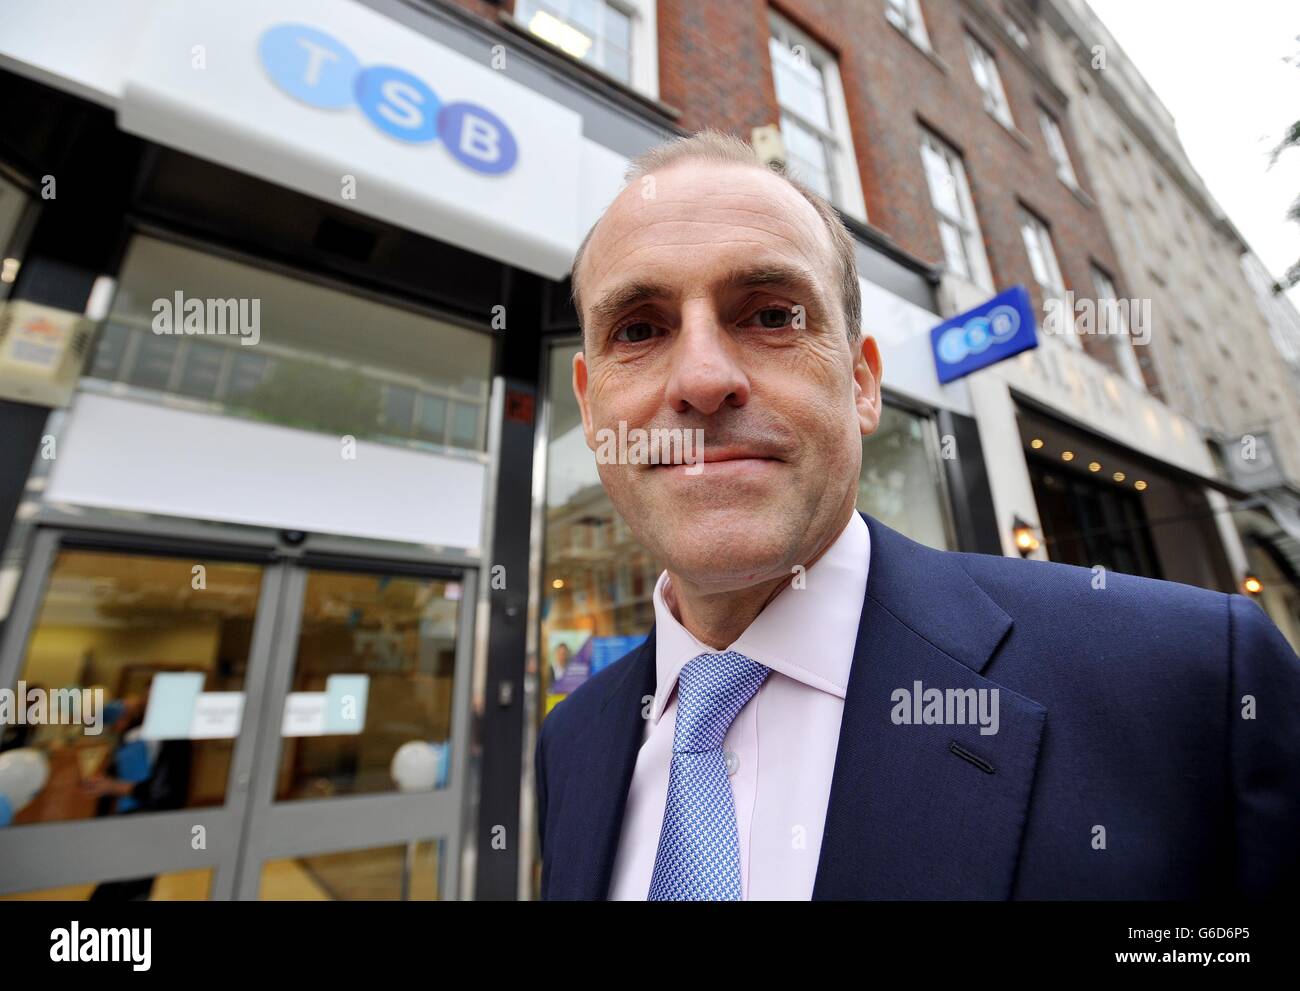 TSB chief executive Paul Pester opens a branch of TSB in Baker Street, London on the bank's first day of trading, launched by Lloyds Banking Group, more than 600 branches and eight million accounts have been split from Lloyds in order to meet European competition rules. Stock Photo